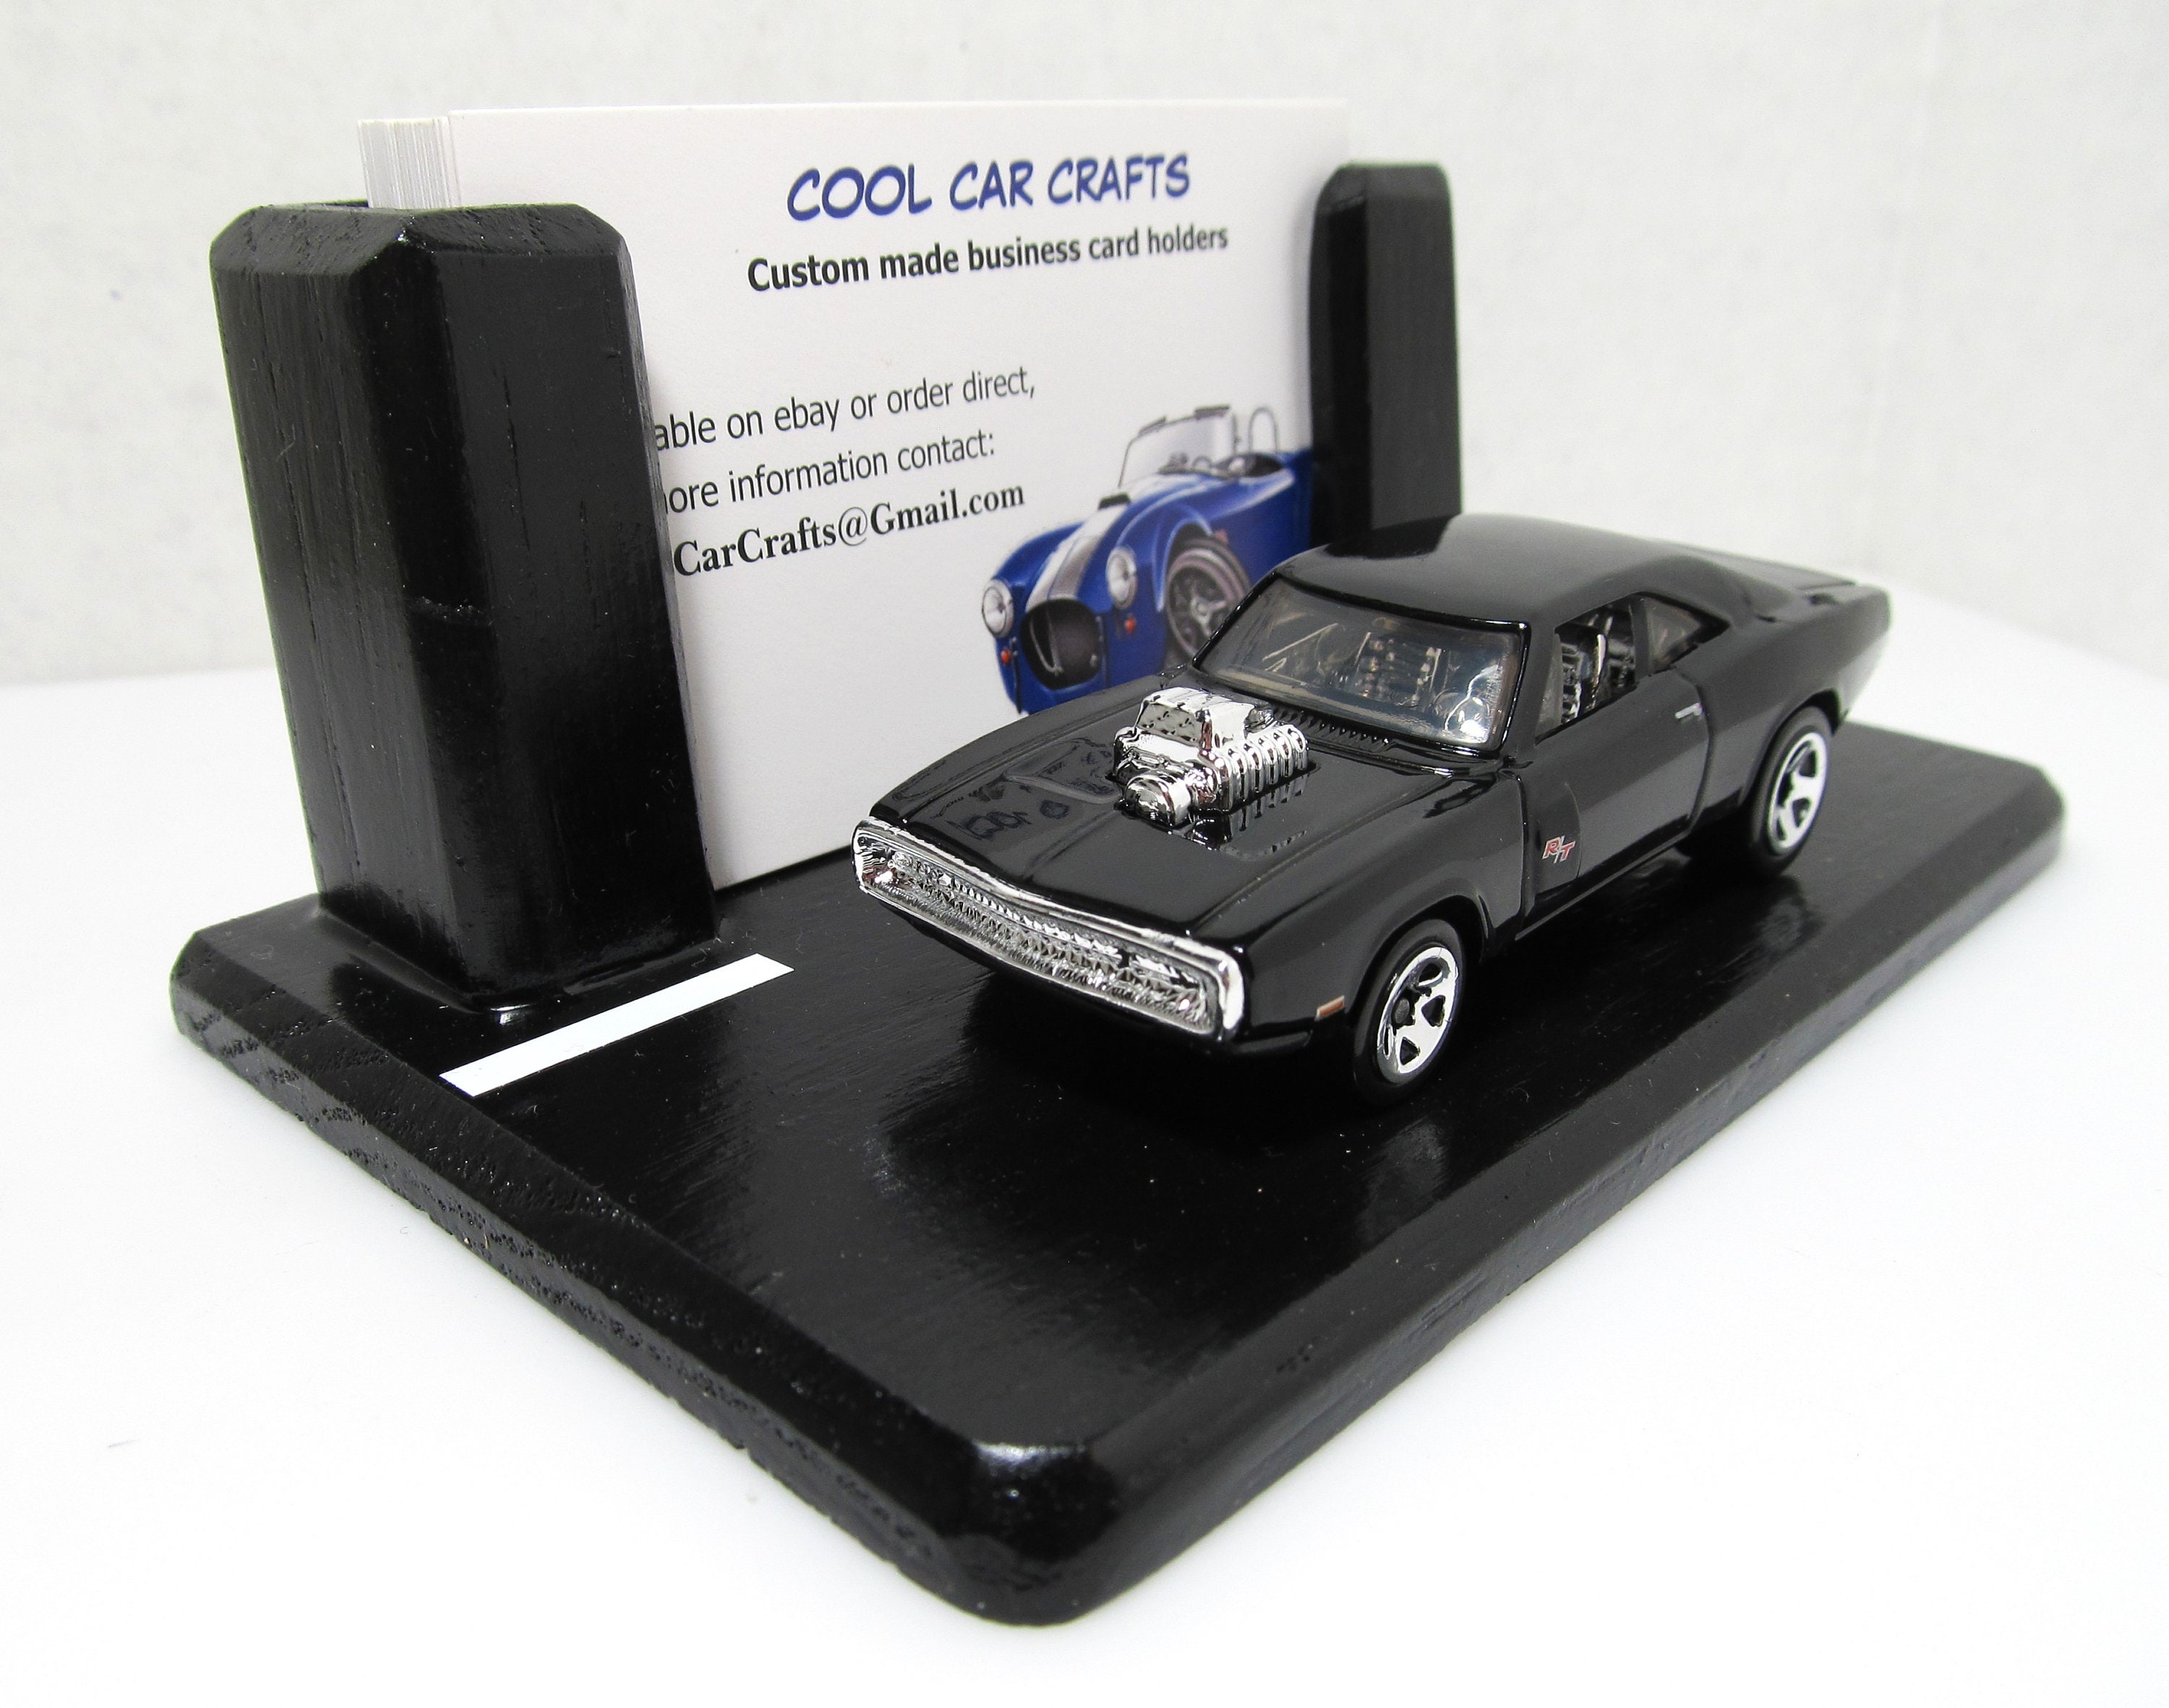 Voiture DODGE Charger RT Fast and Furious 7 au 1/24 Avec Figurine Dom  Toretto